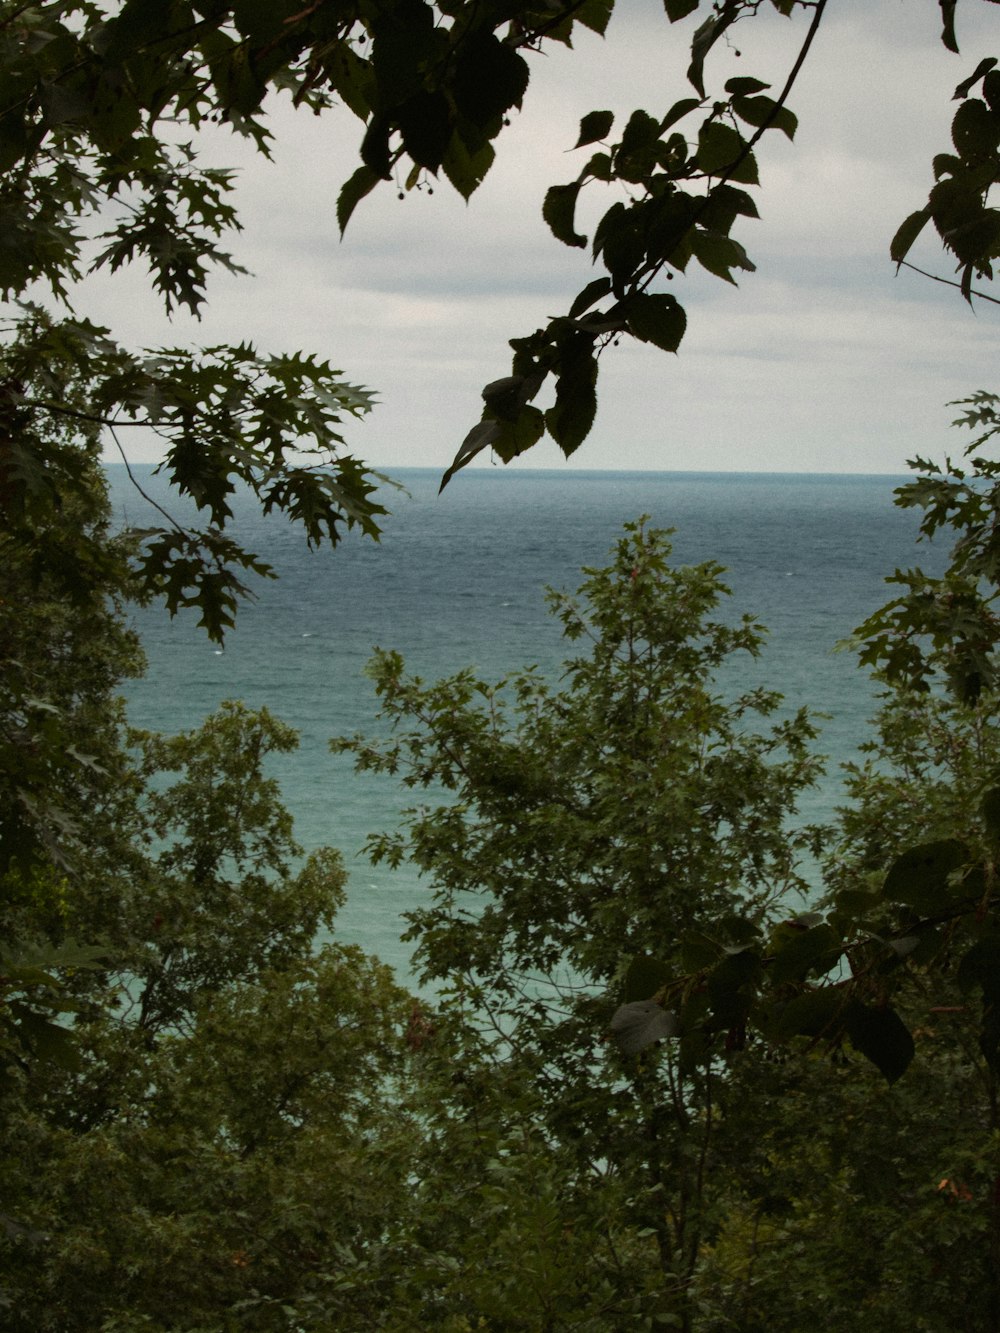 a view of a body of water through some trees